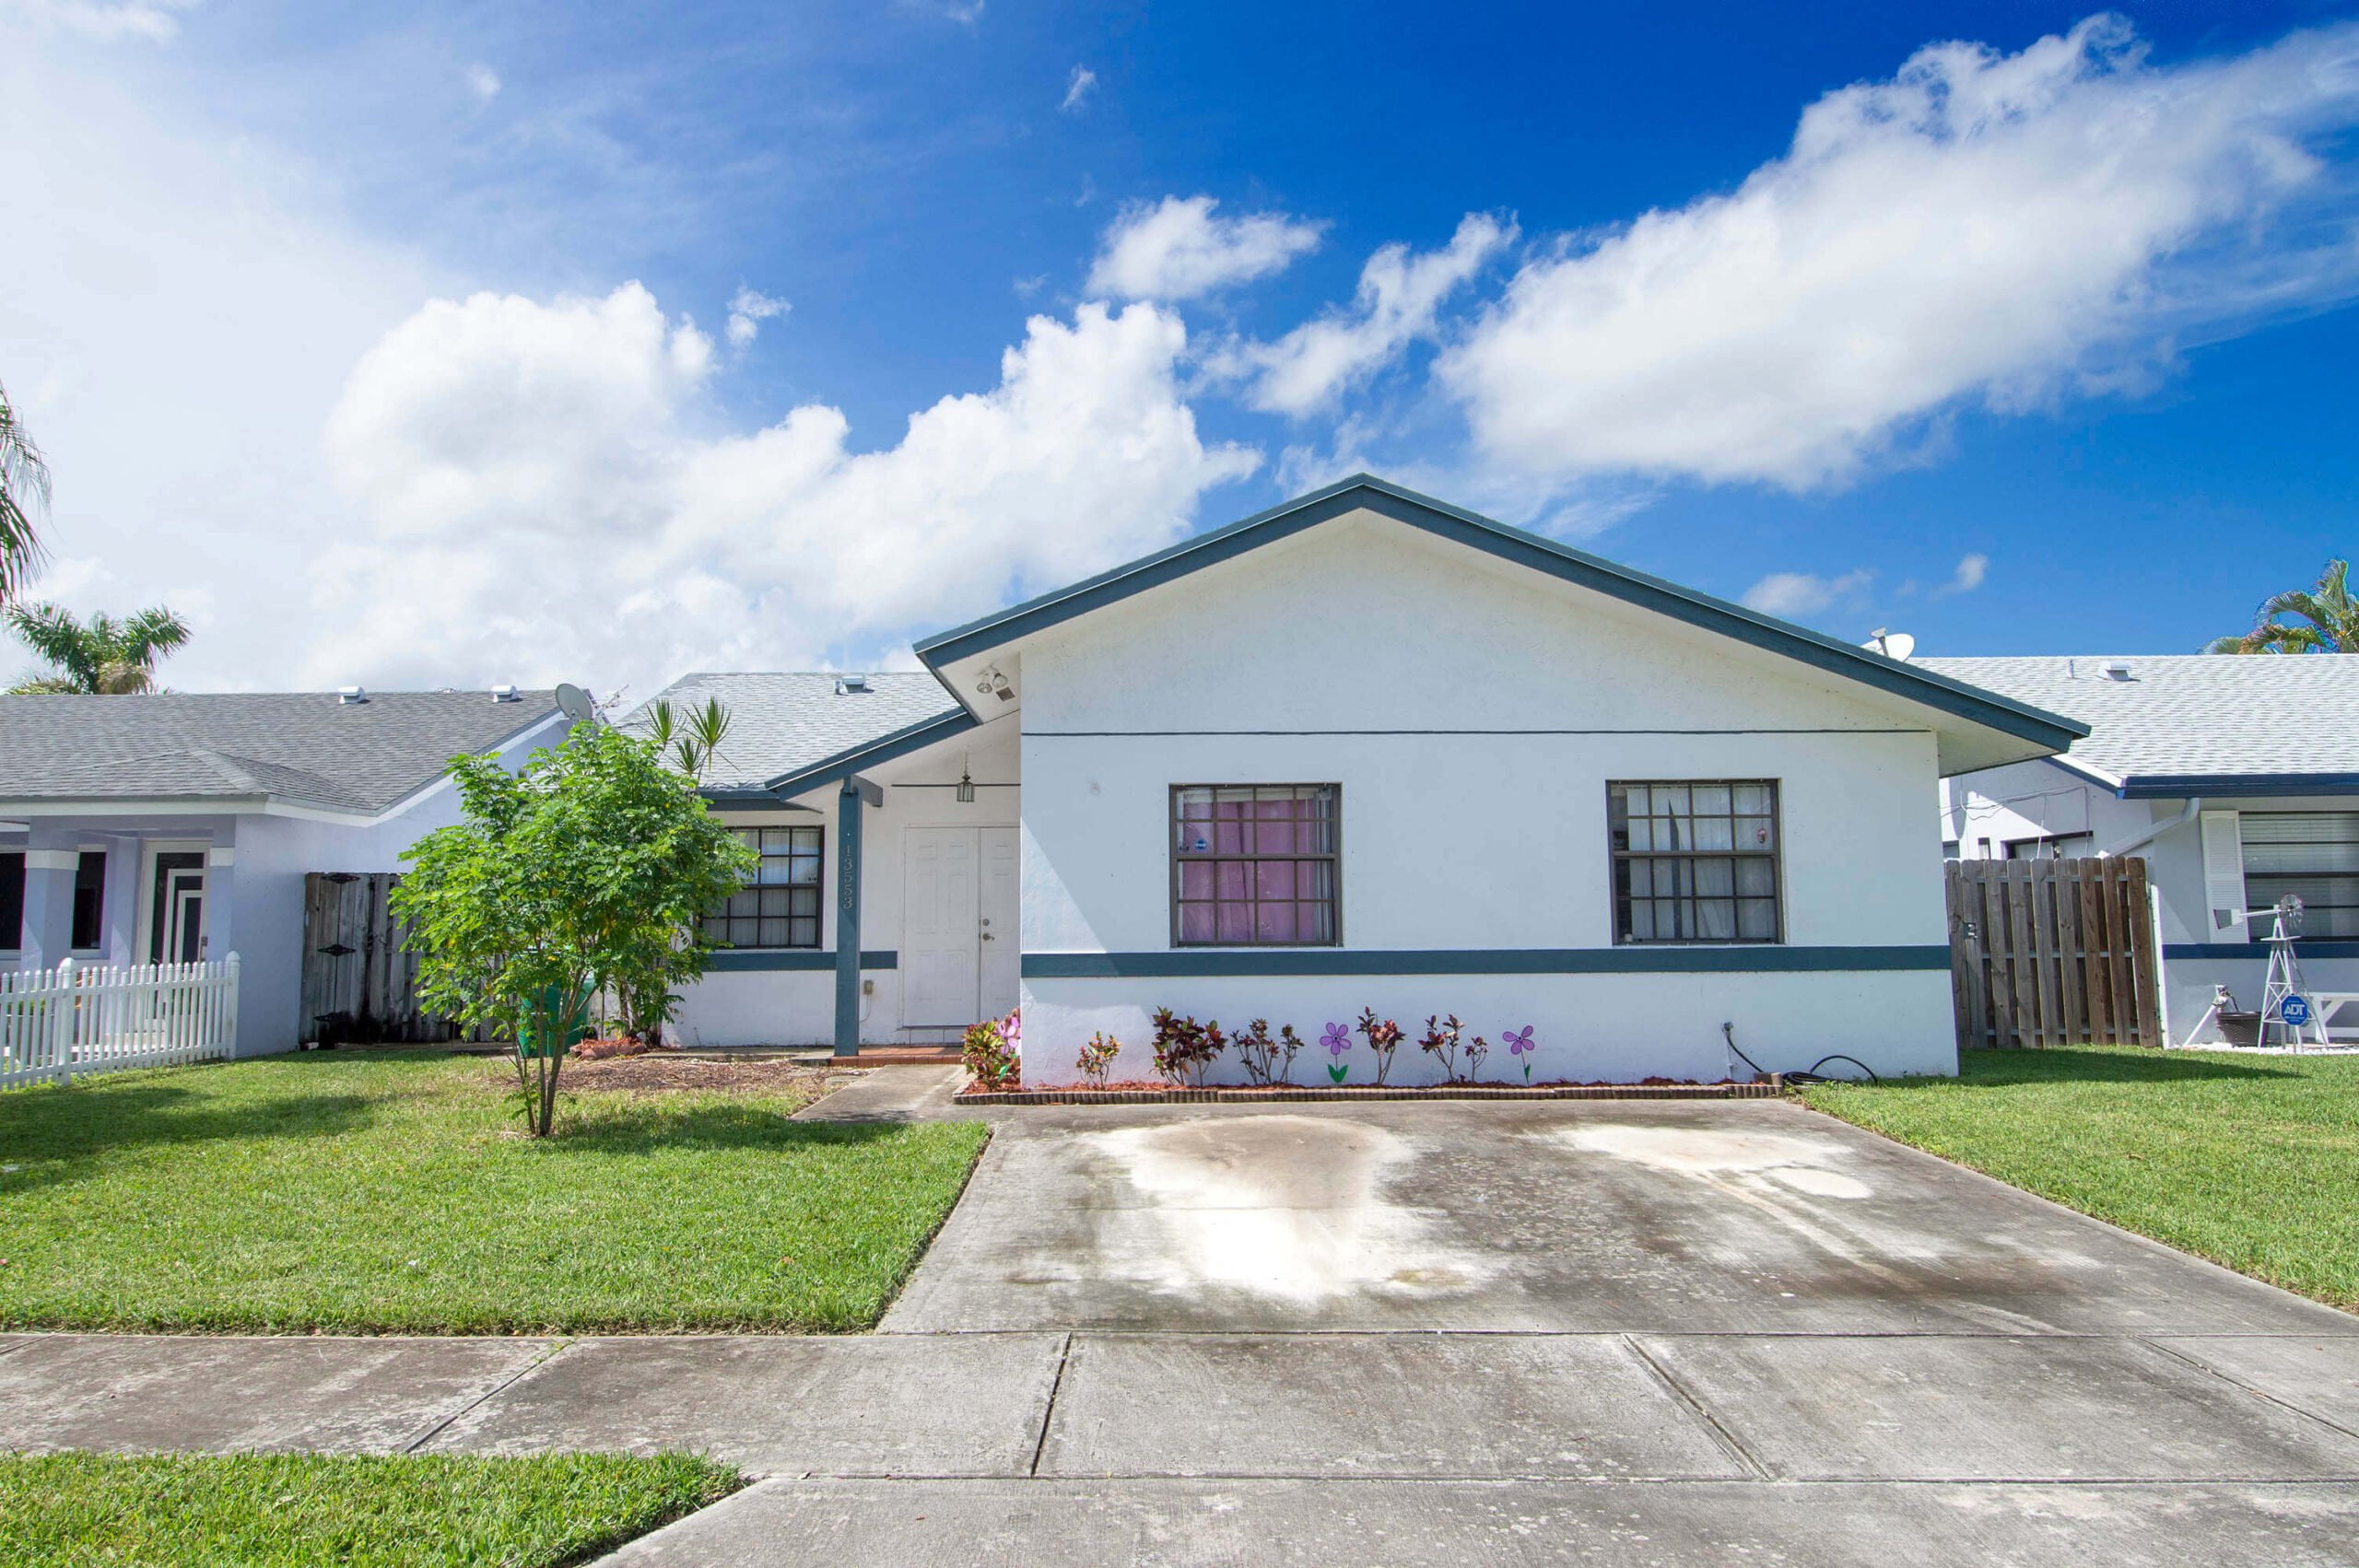 House Front - 13553 SW 179th St, Miami, FL 33177 - © Flat Fee Florida Realty